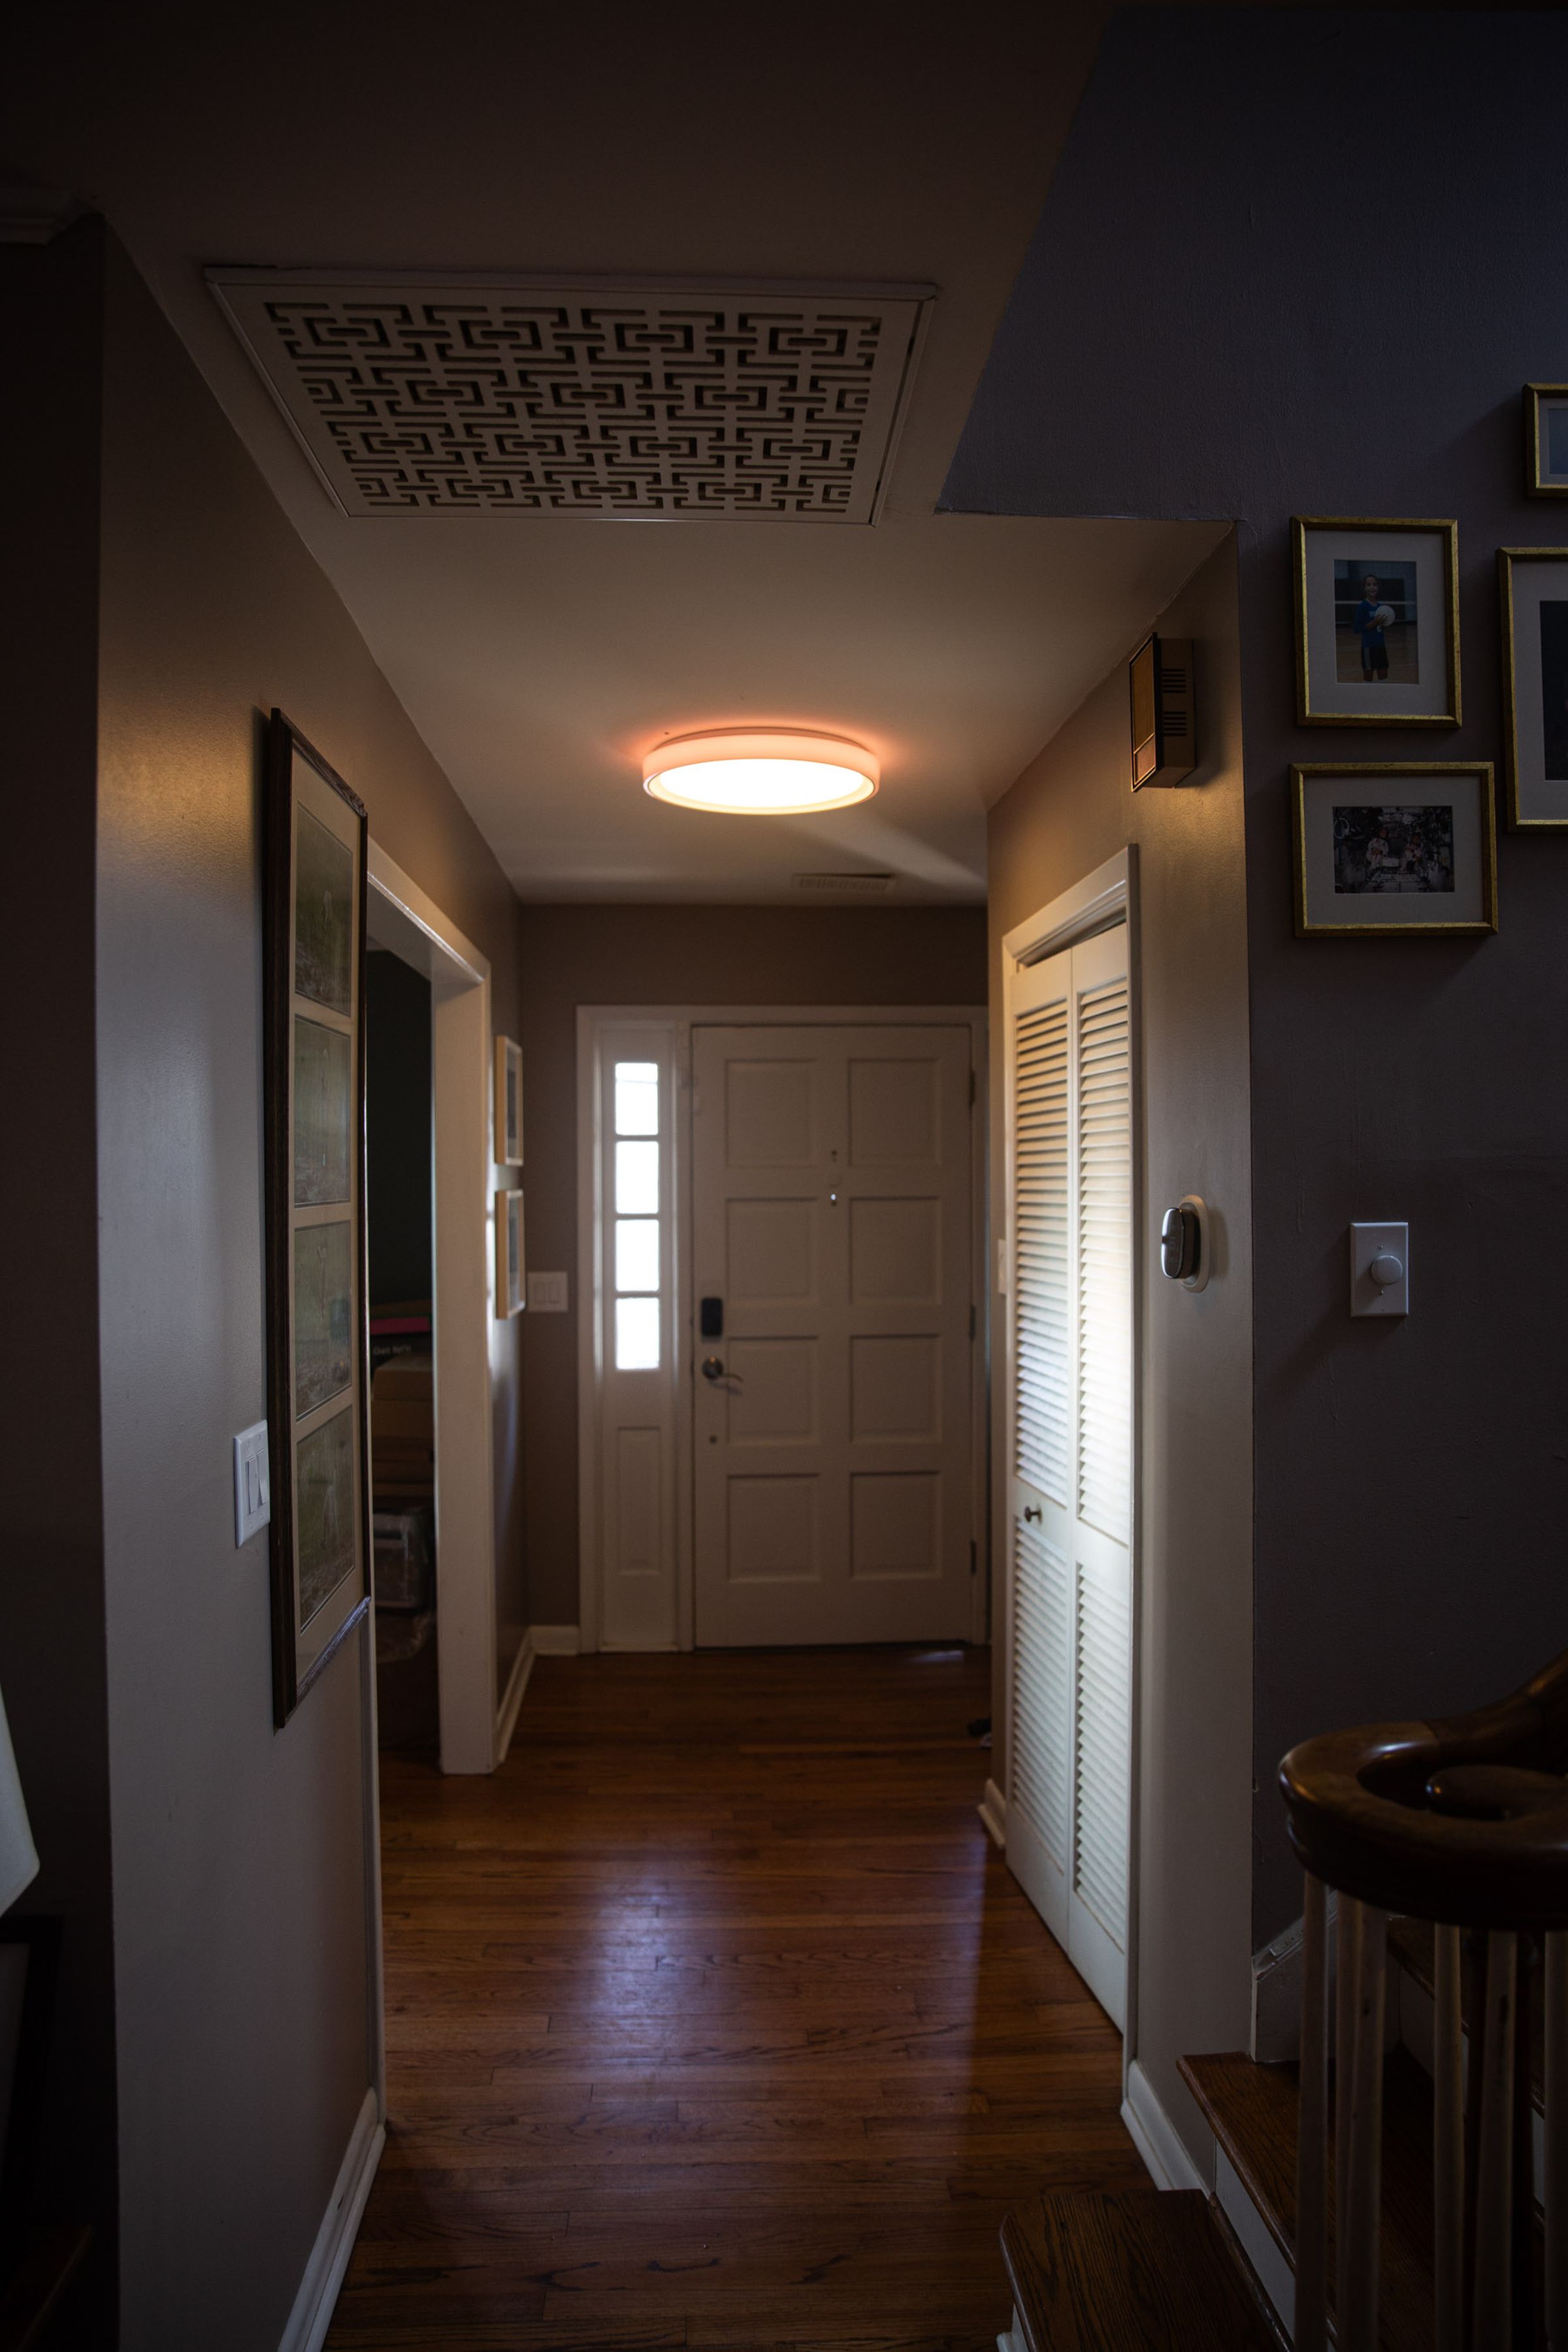 Aqara’s light has a more traditional look but with high-tech features.